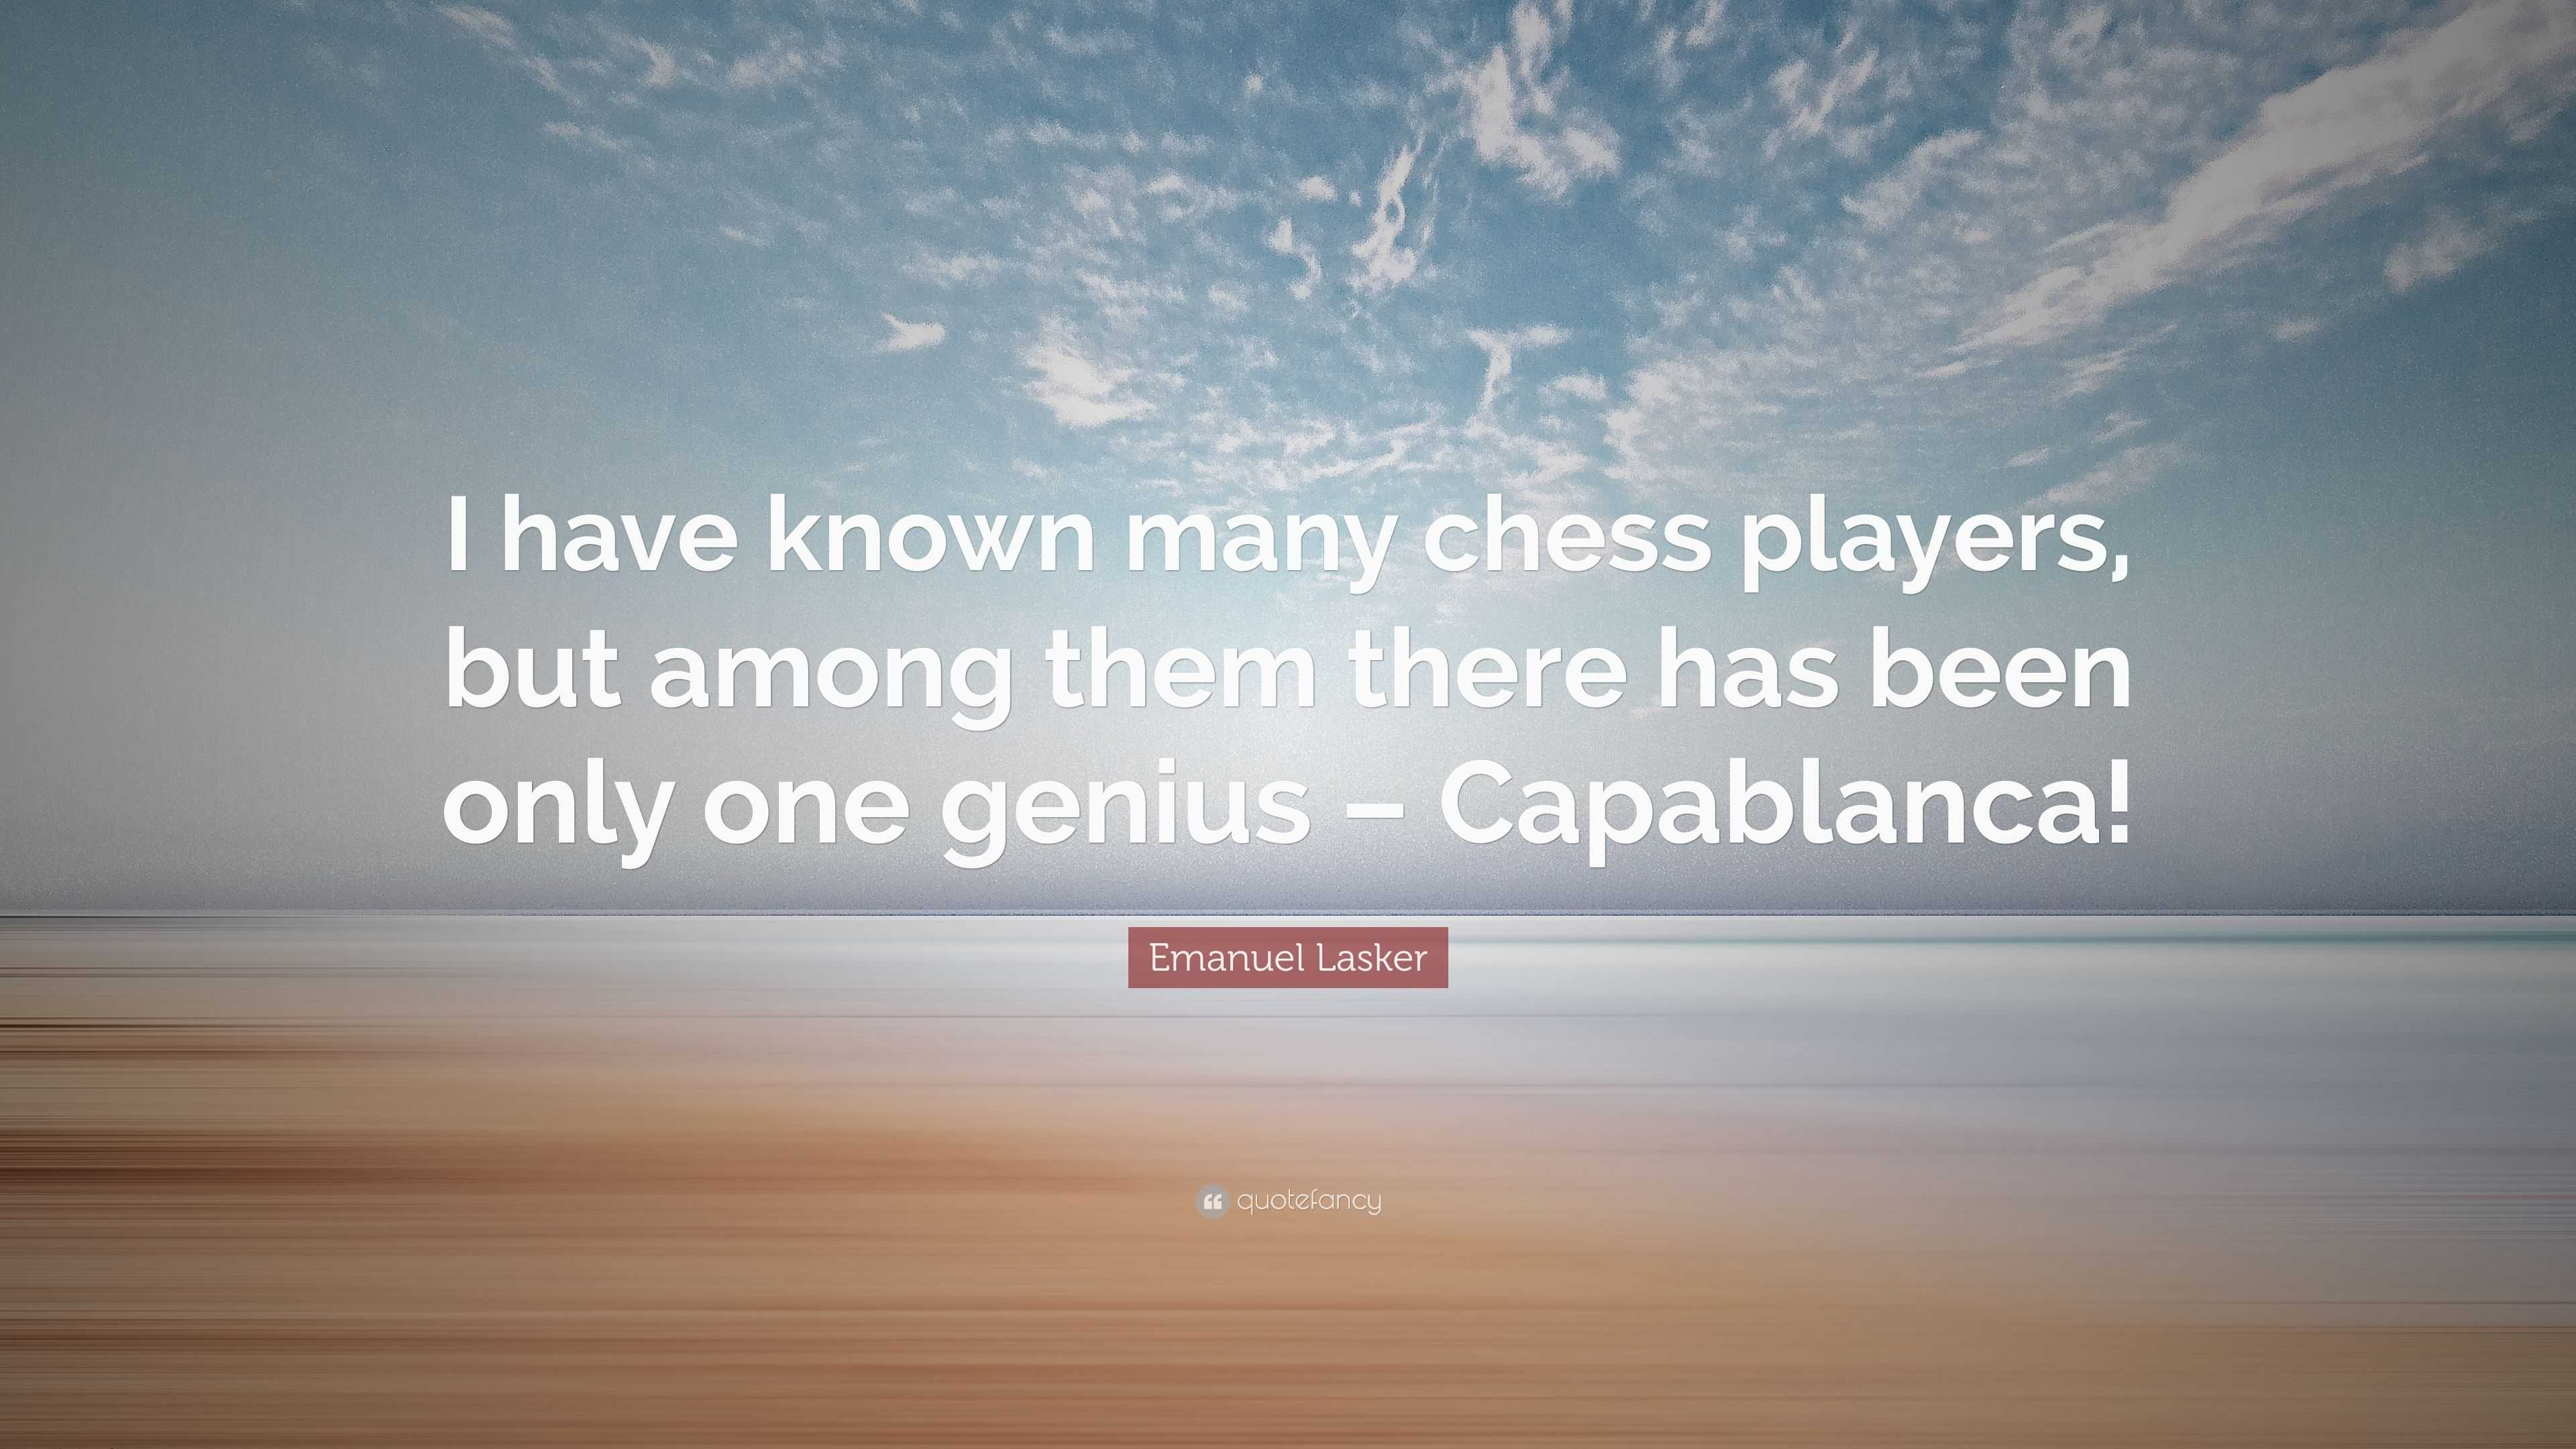 Capablanca master of masters❗🔥Some people think he was the best player of  all time, because of its natural talent. But it's hard to compare players  of